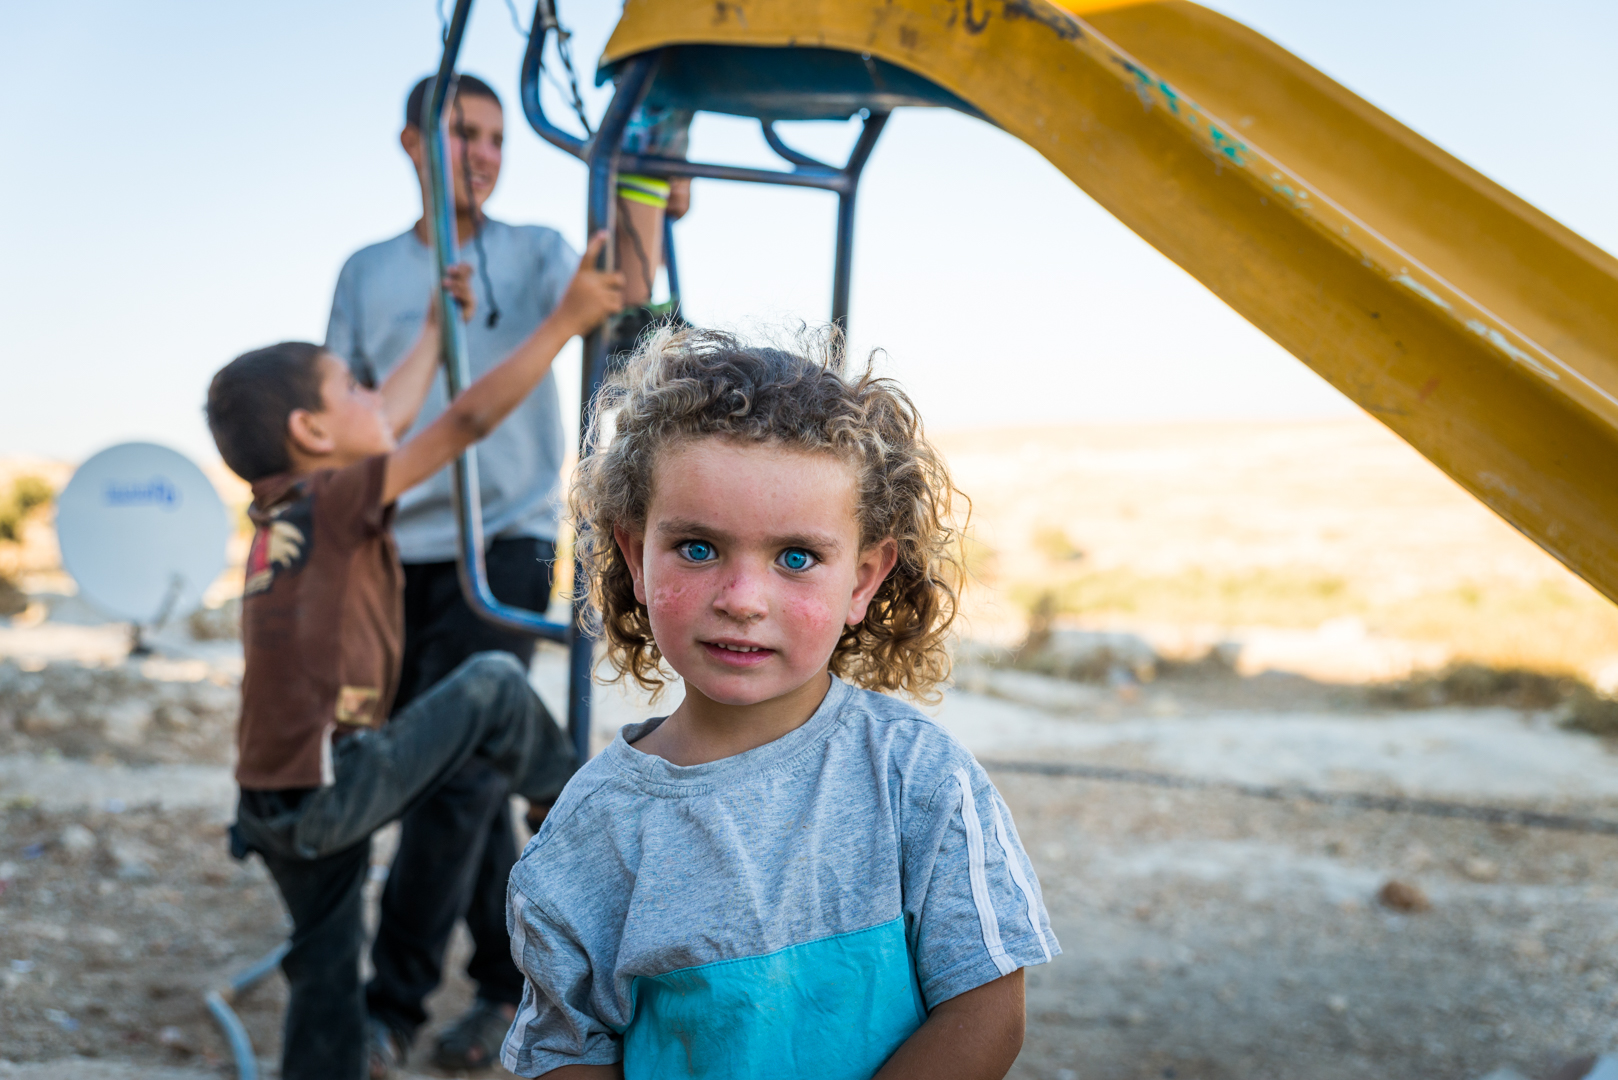 A Palestinian girl stands in front of a slide in Susiya.